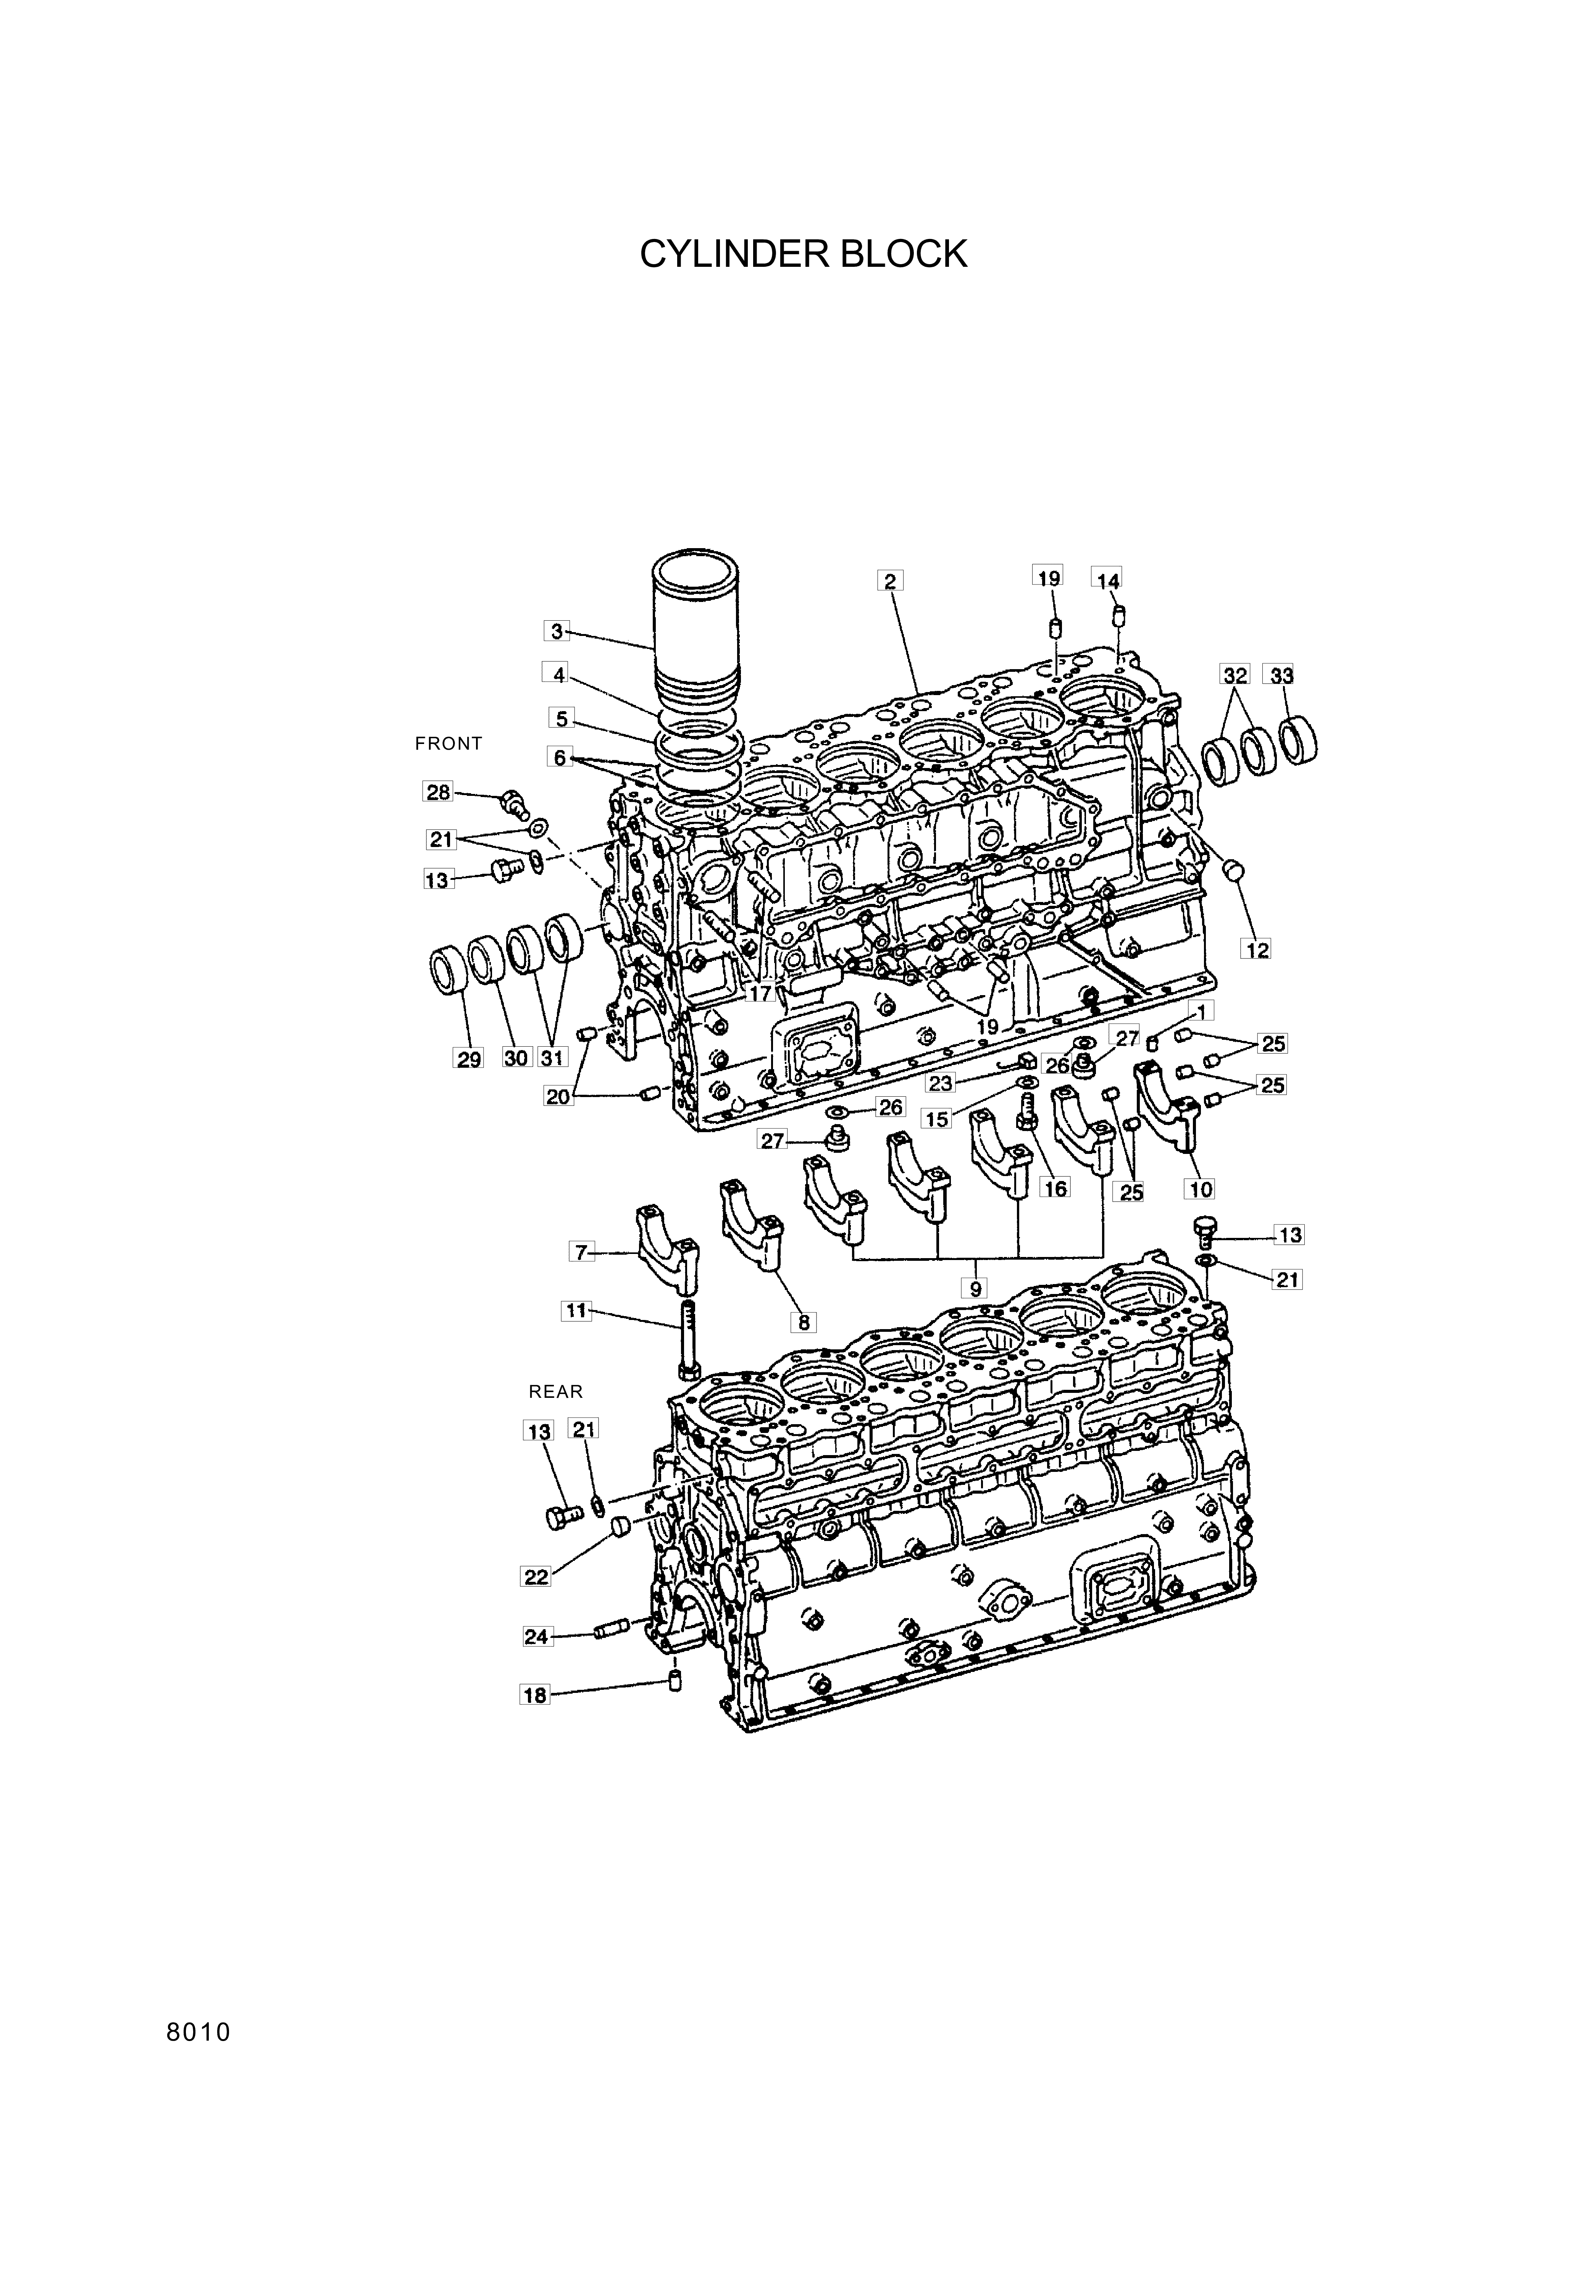 drawing for Hyundai Construction Equipment S21100-83000 - CYL BLOCK (figure 3)